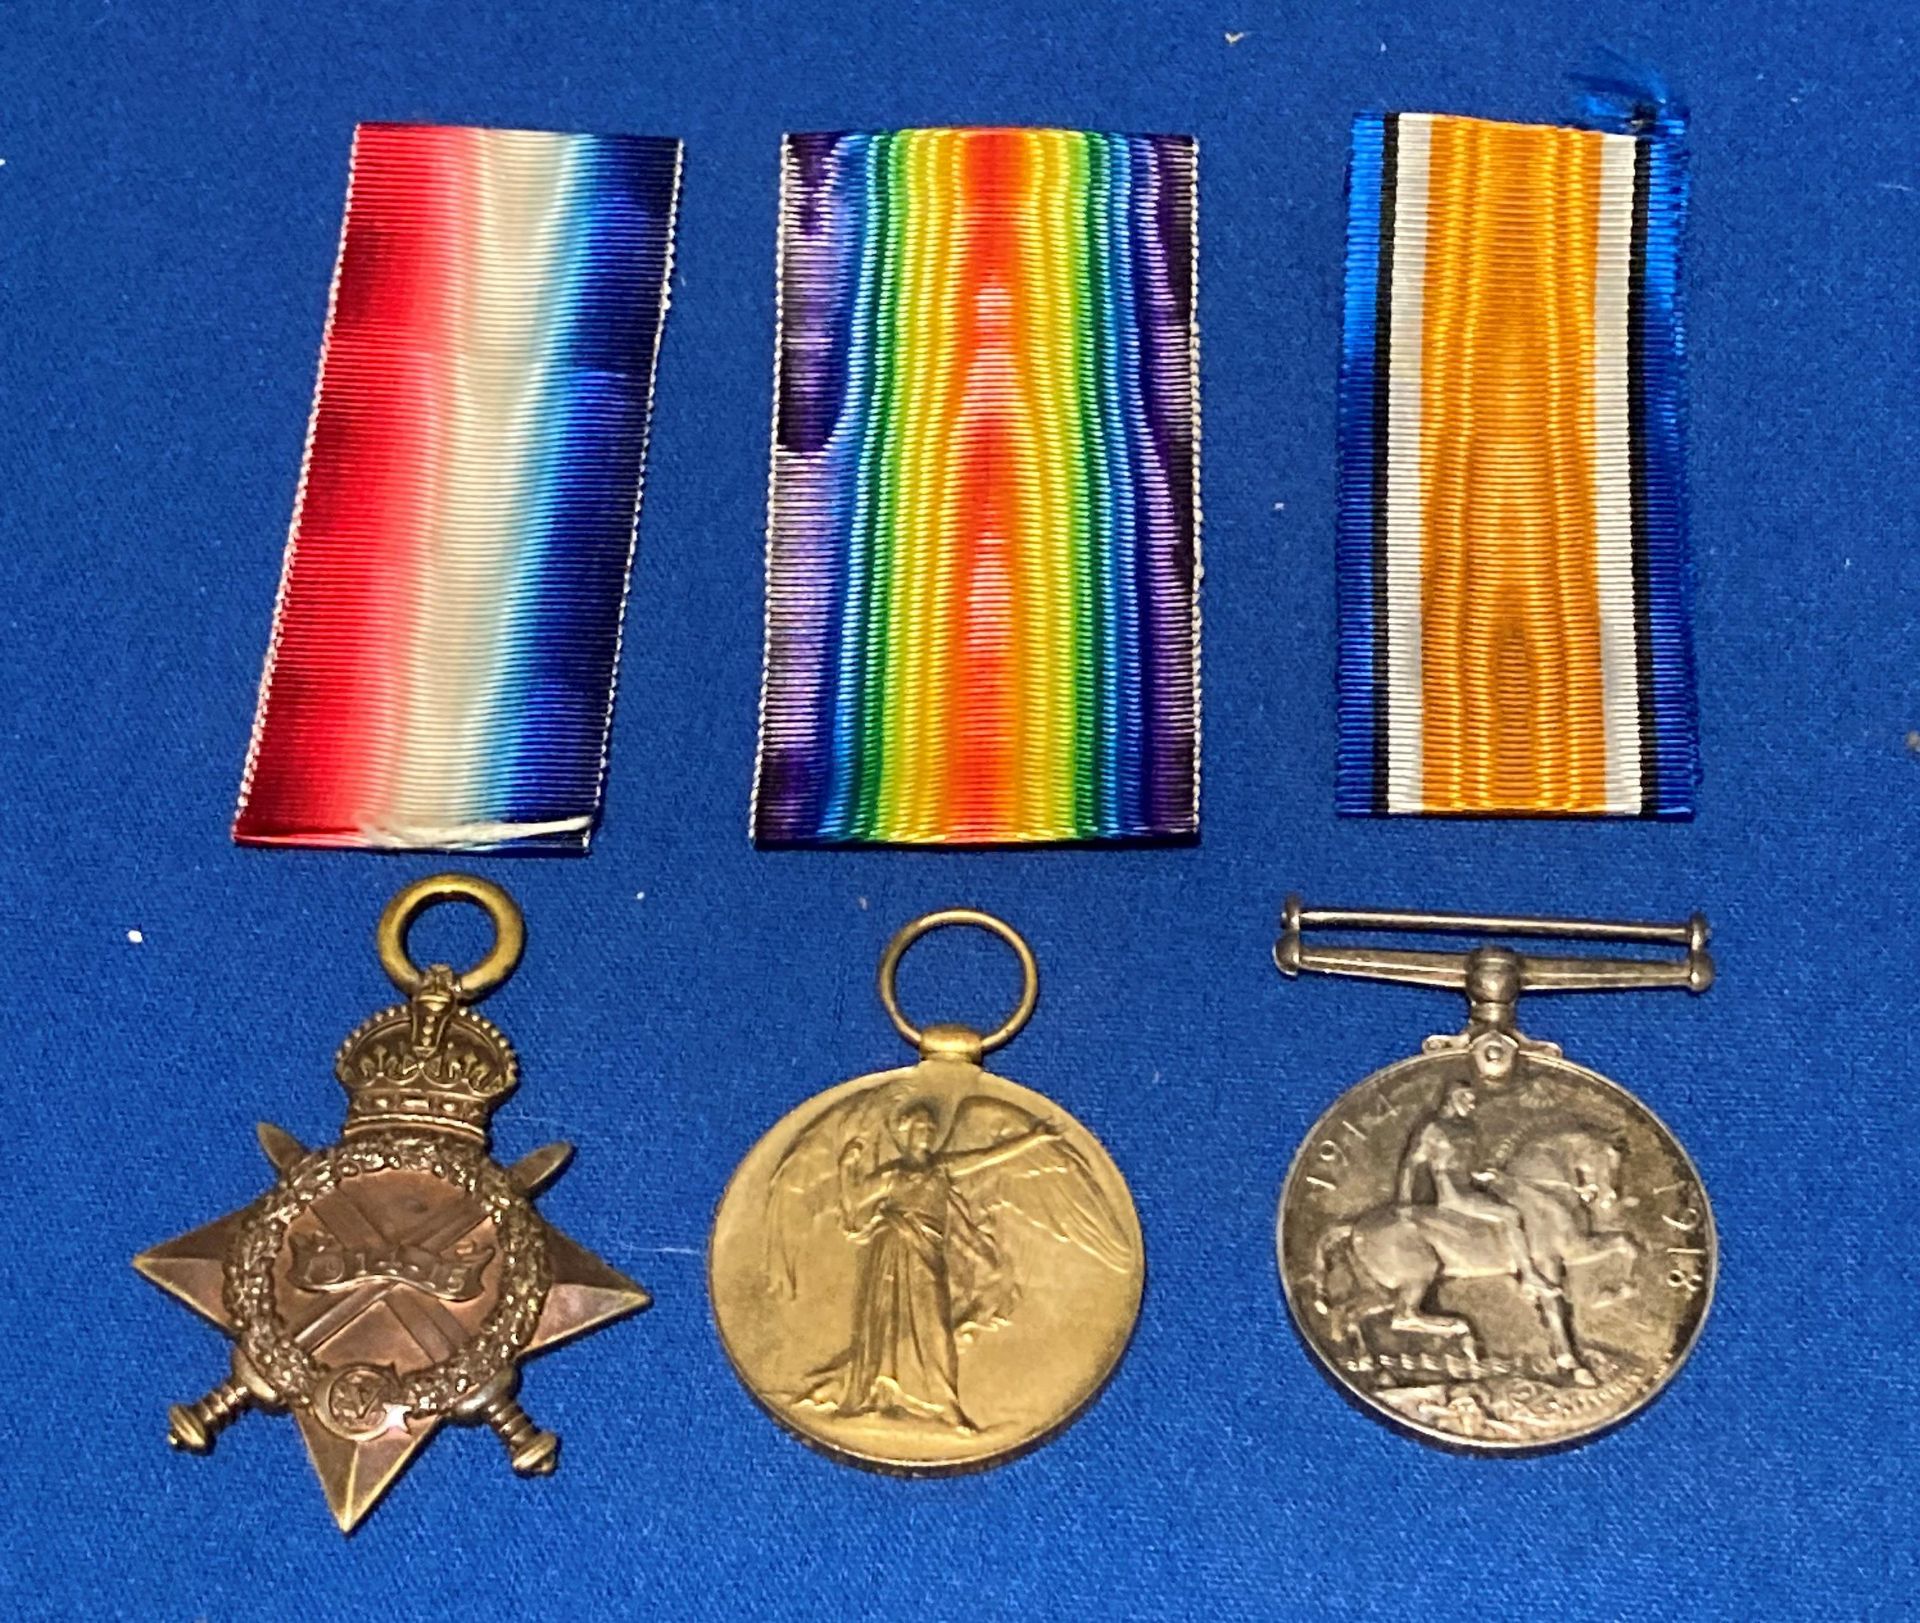 Three First World War medals to 23661 Pte. R Valmond, Worc. - Image 2 of 5